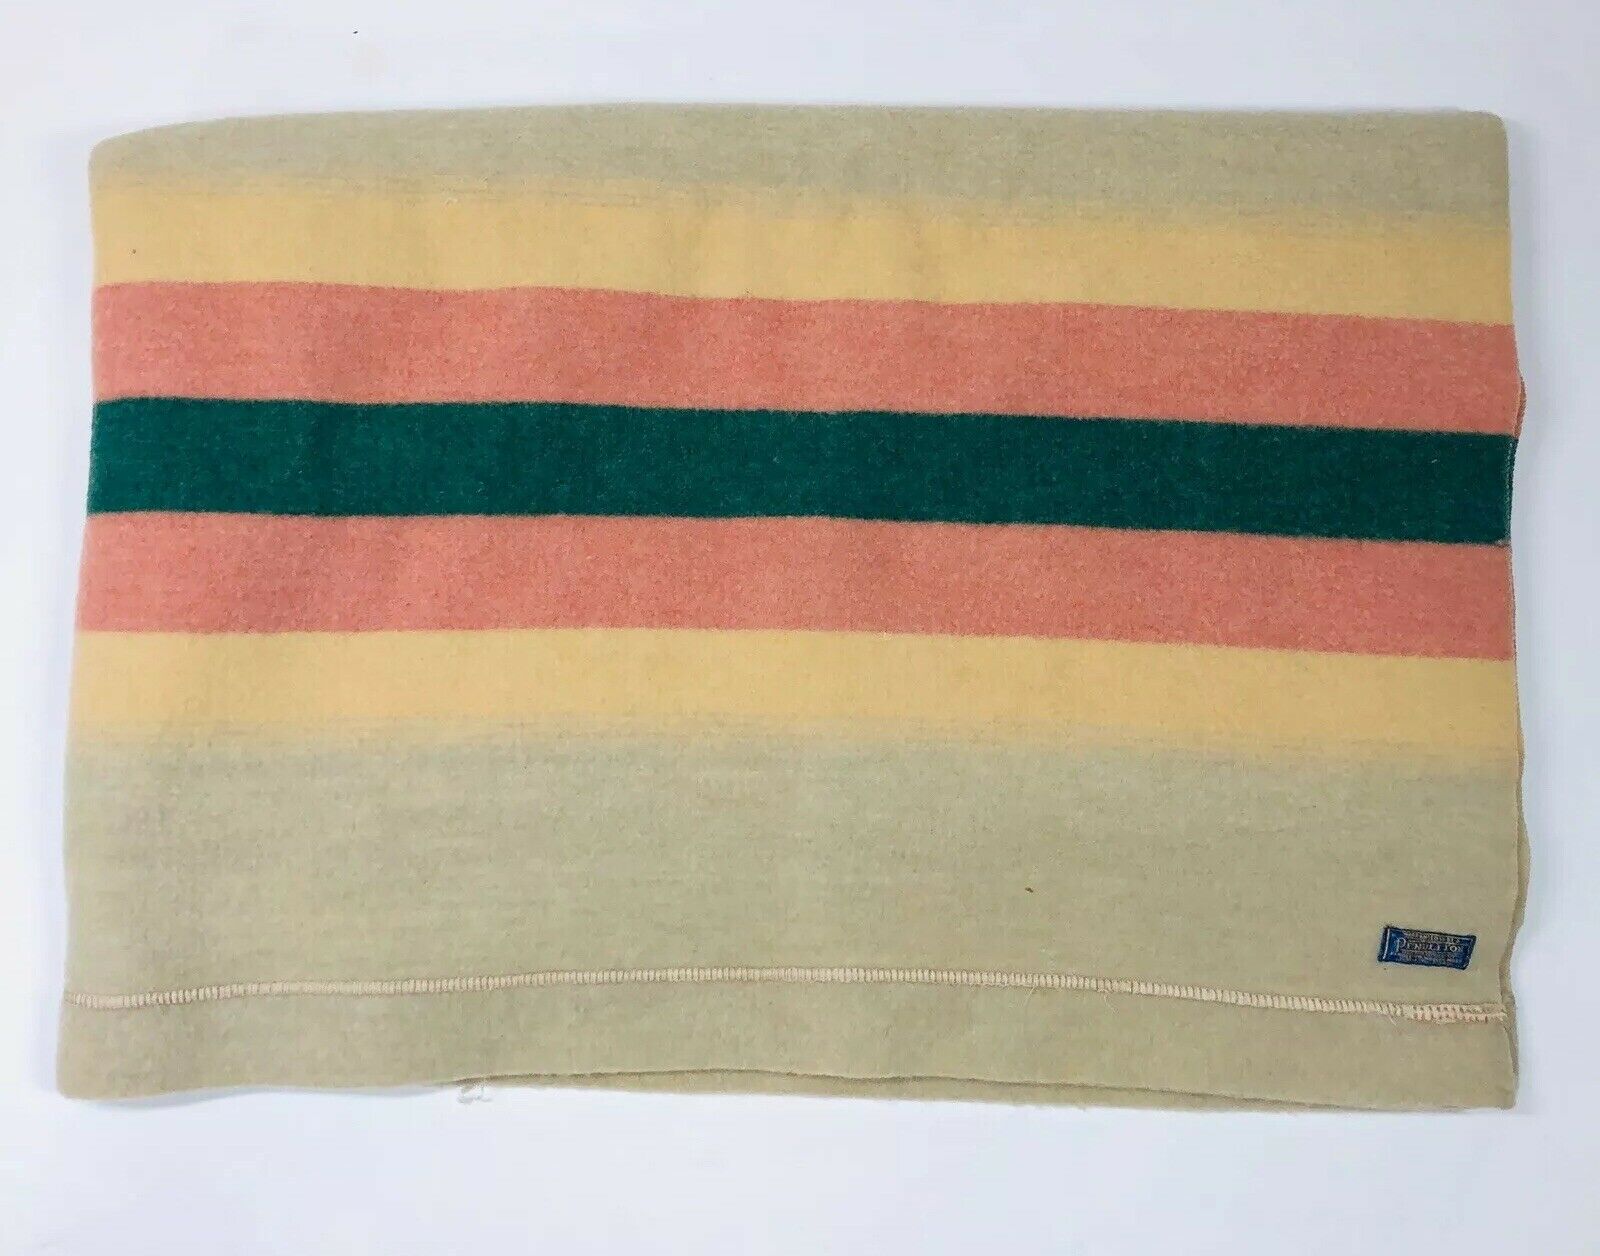 The 1940s stripe version of the Pendleton Zion National Park blanket.